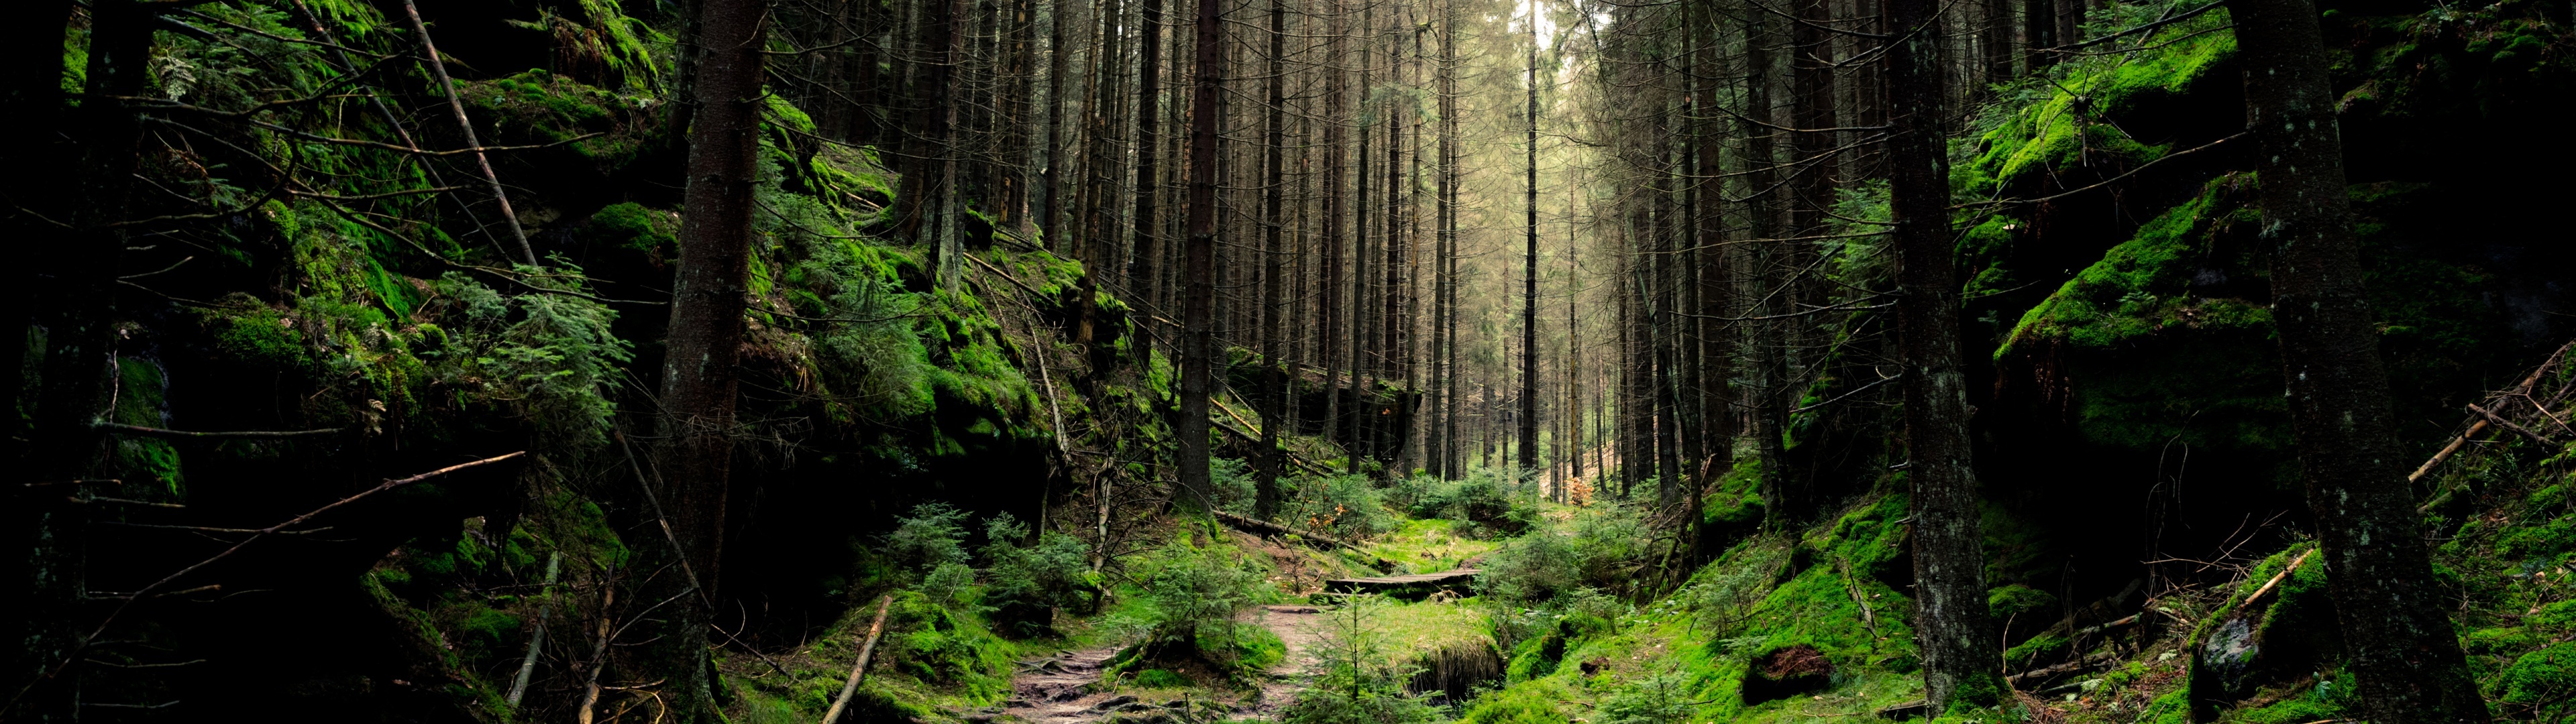 Green Forest: Saxon Switzerland National Park, Nature, Countryside. 3840x1080 Dual Screen Wallpaper.